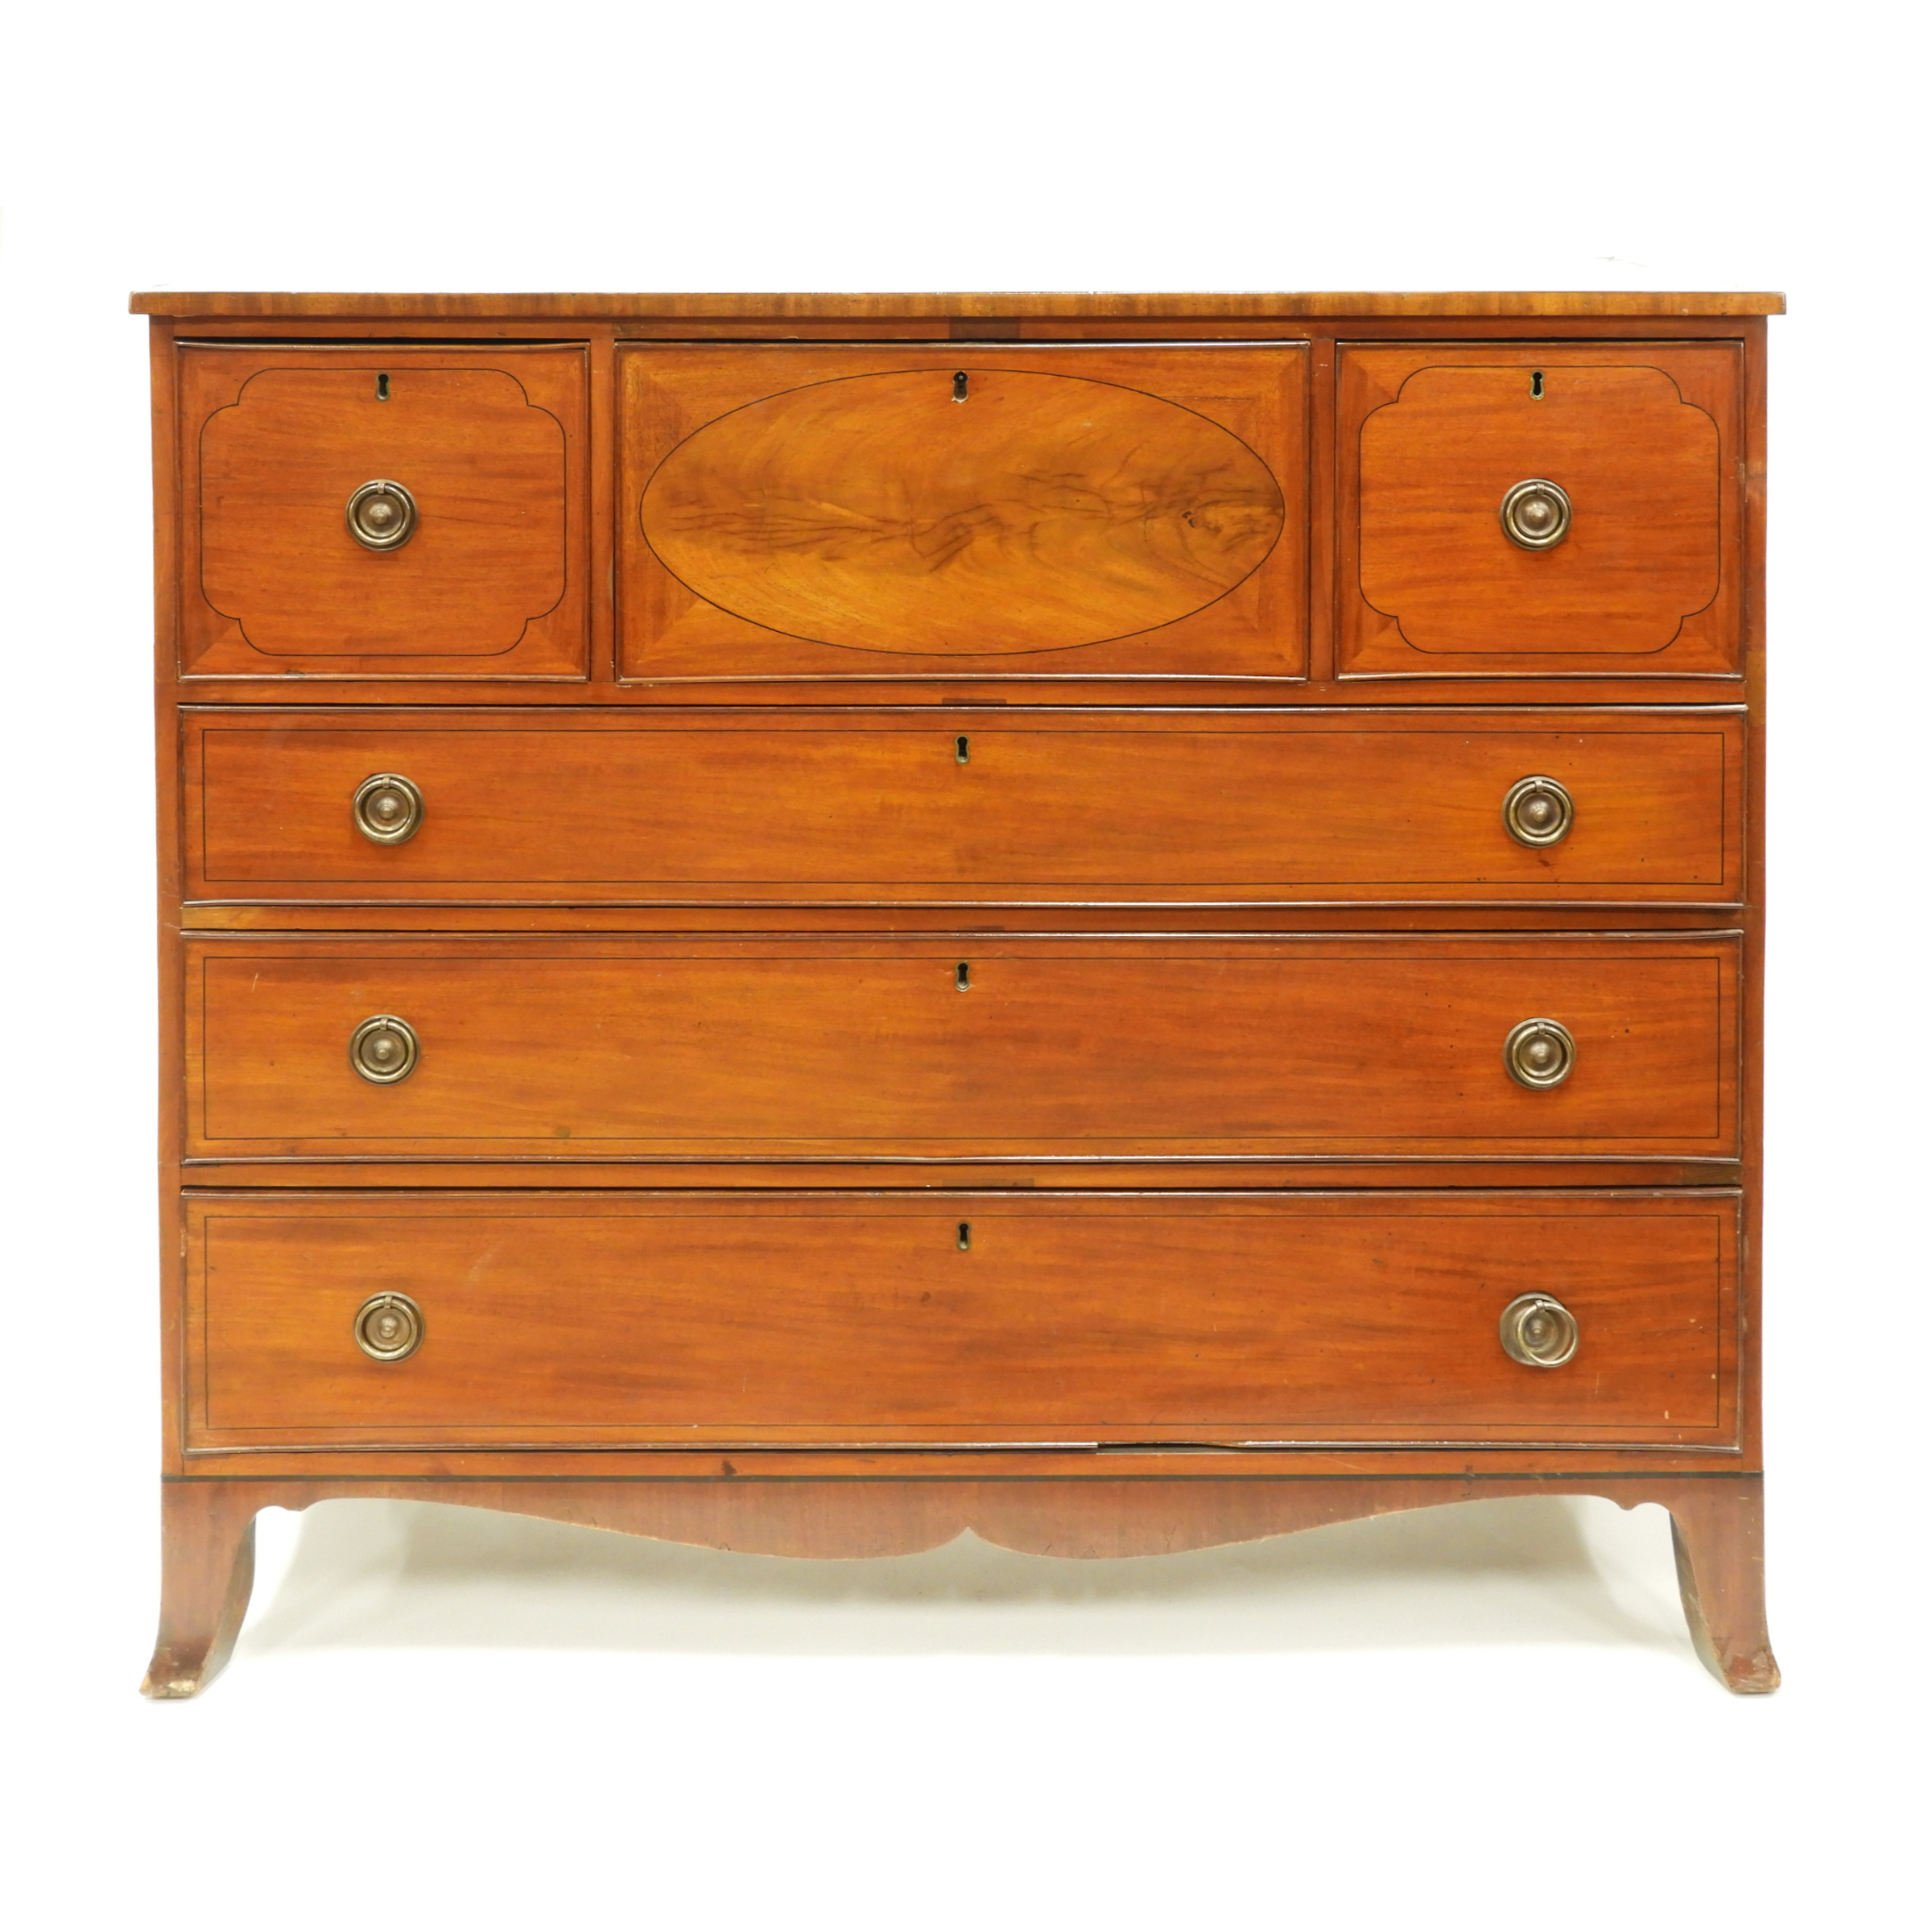 Regancy Mahogany Secretaire Chest of Drawers, early 19th century